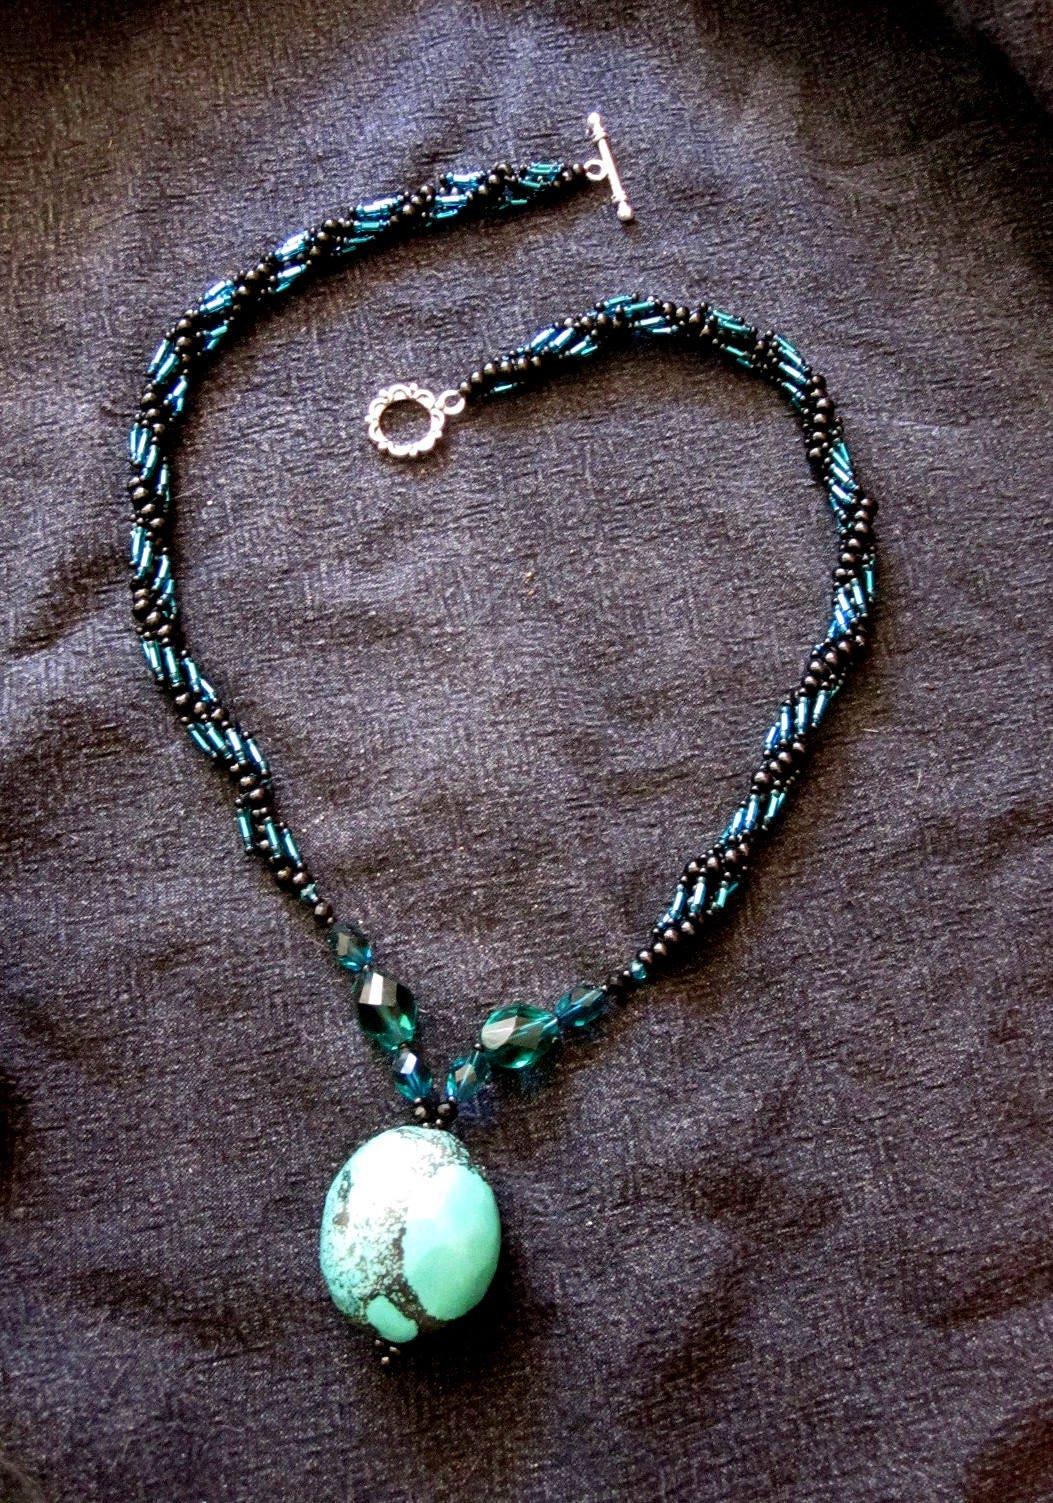 Turquoise - Spiral Stitch Necklace - w/ matching bracelet and earrings